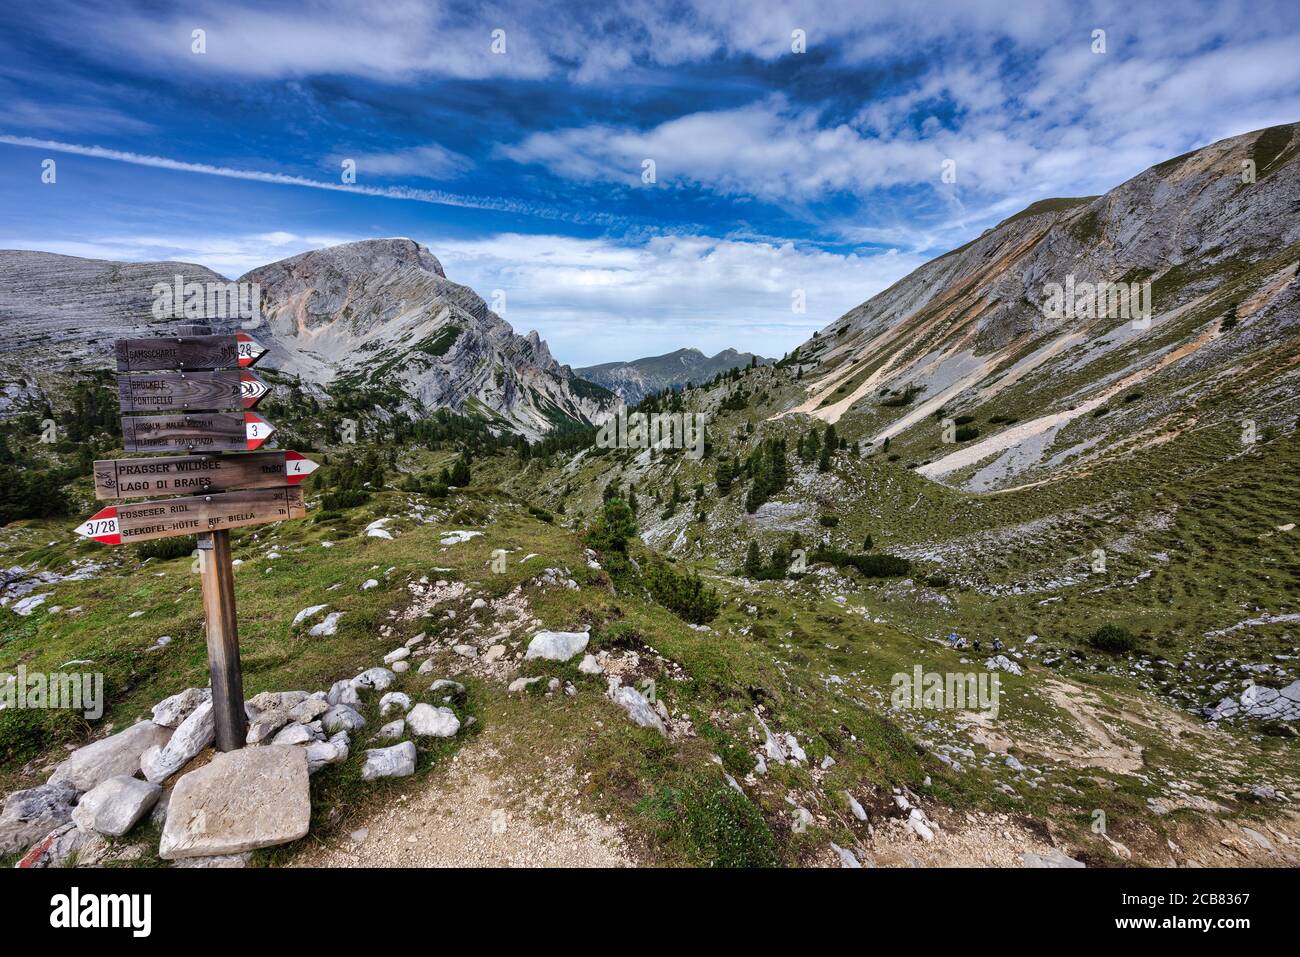 Four hikers beyond a Hiking signpost, Dolomites, Fanes-Sennes-Braies Natural Park, South Tyrol, Italy Stock Photo